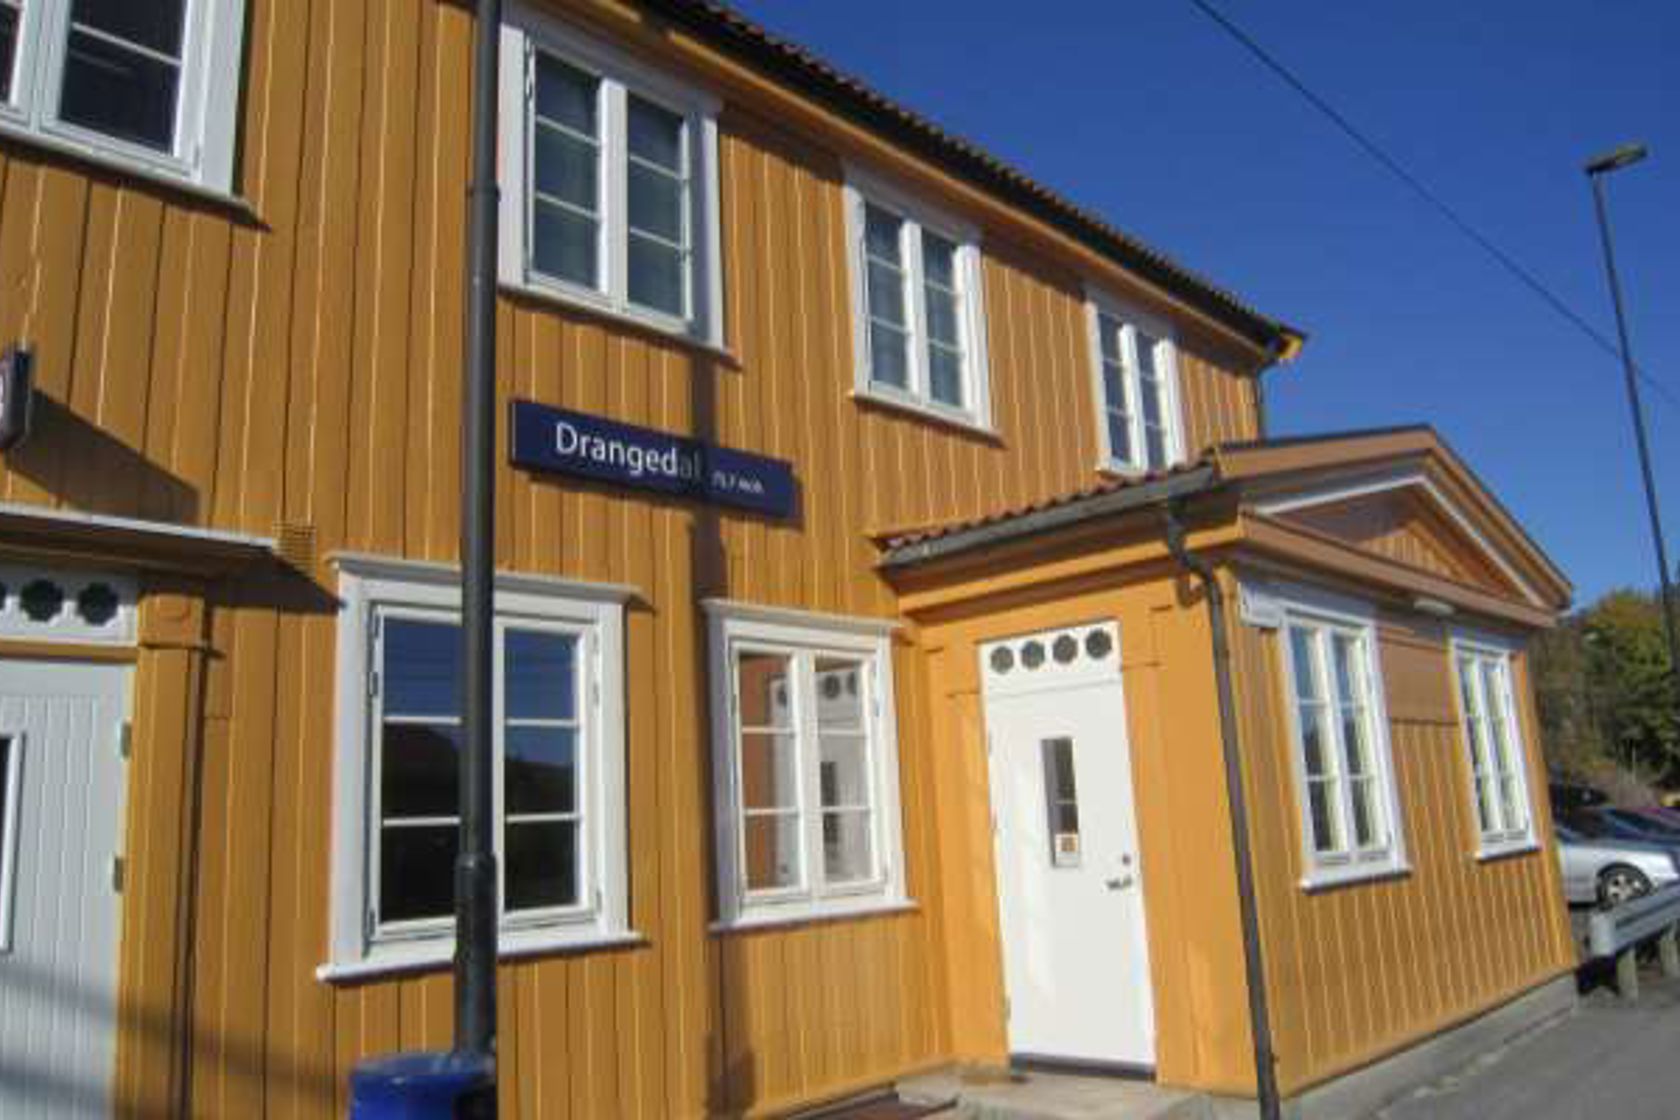 Exterior view of Drangedal station